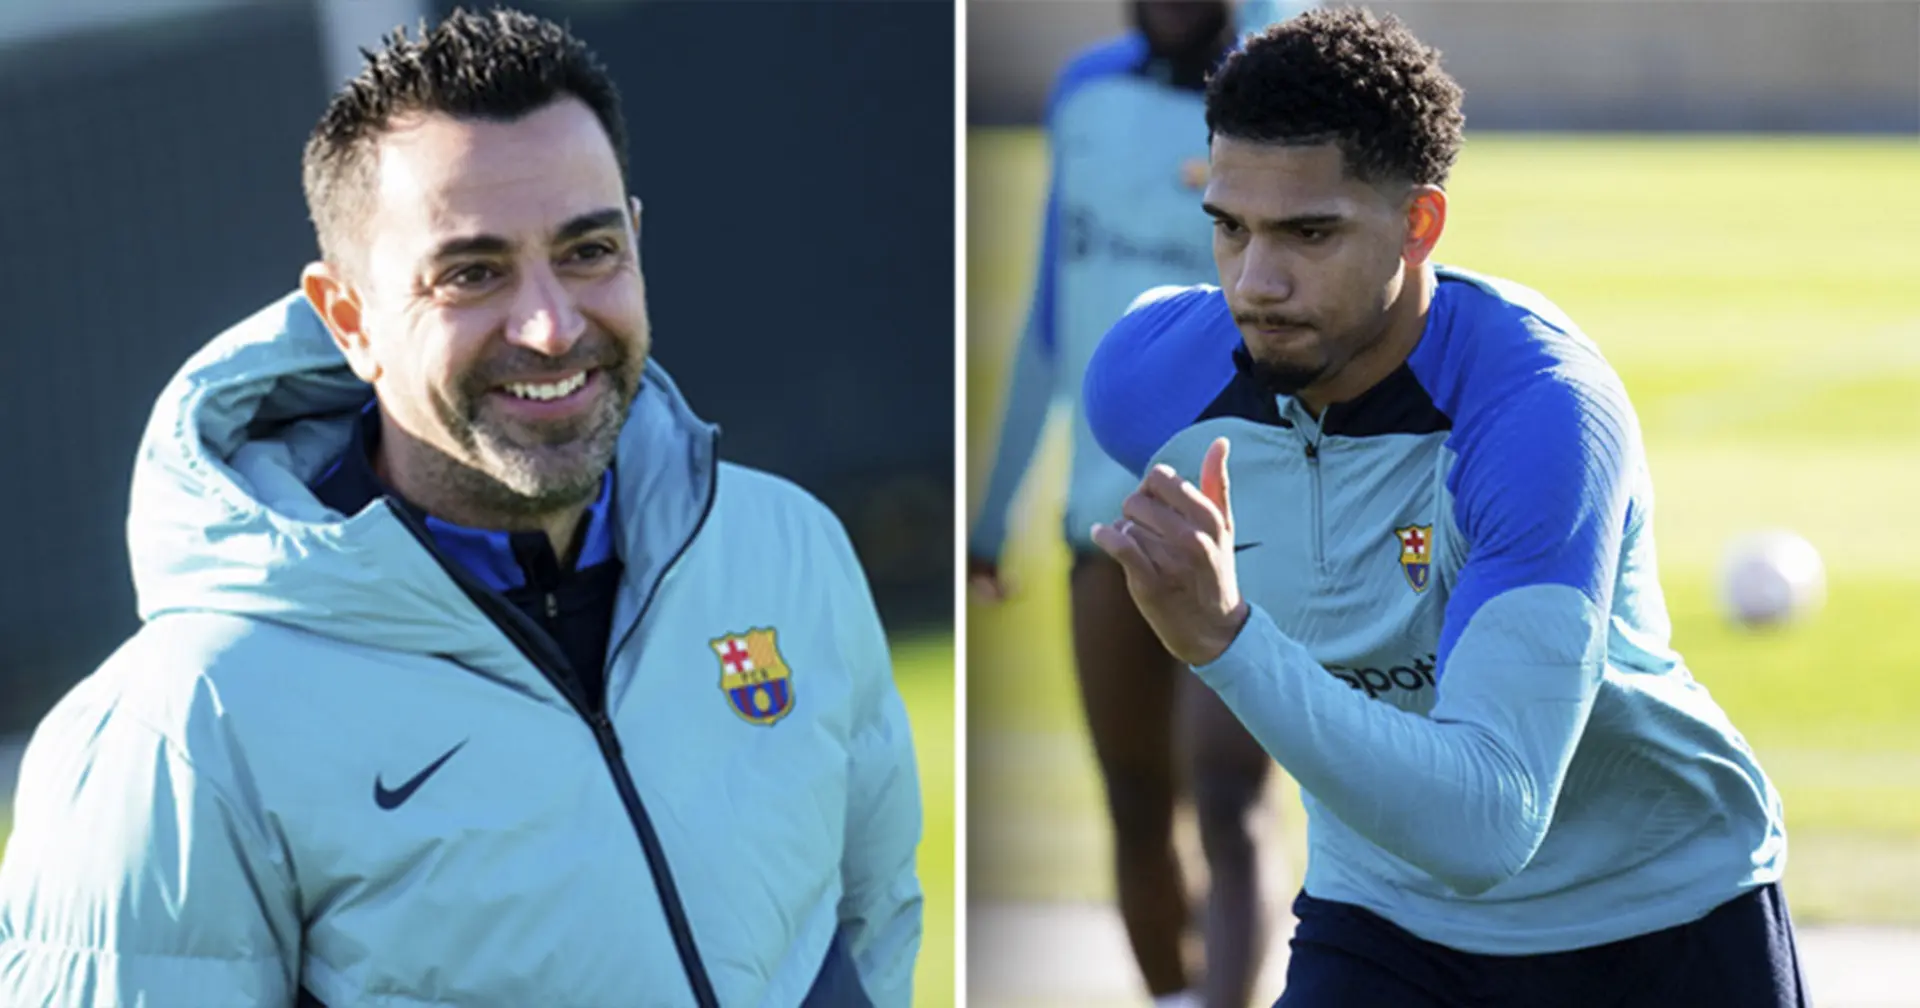 Araujo back in action and 6 more pics as Barca restart training